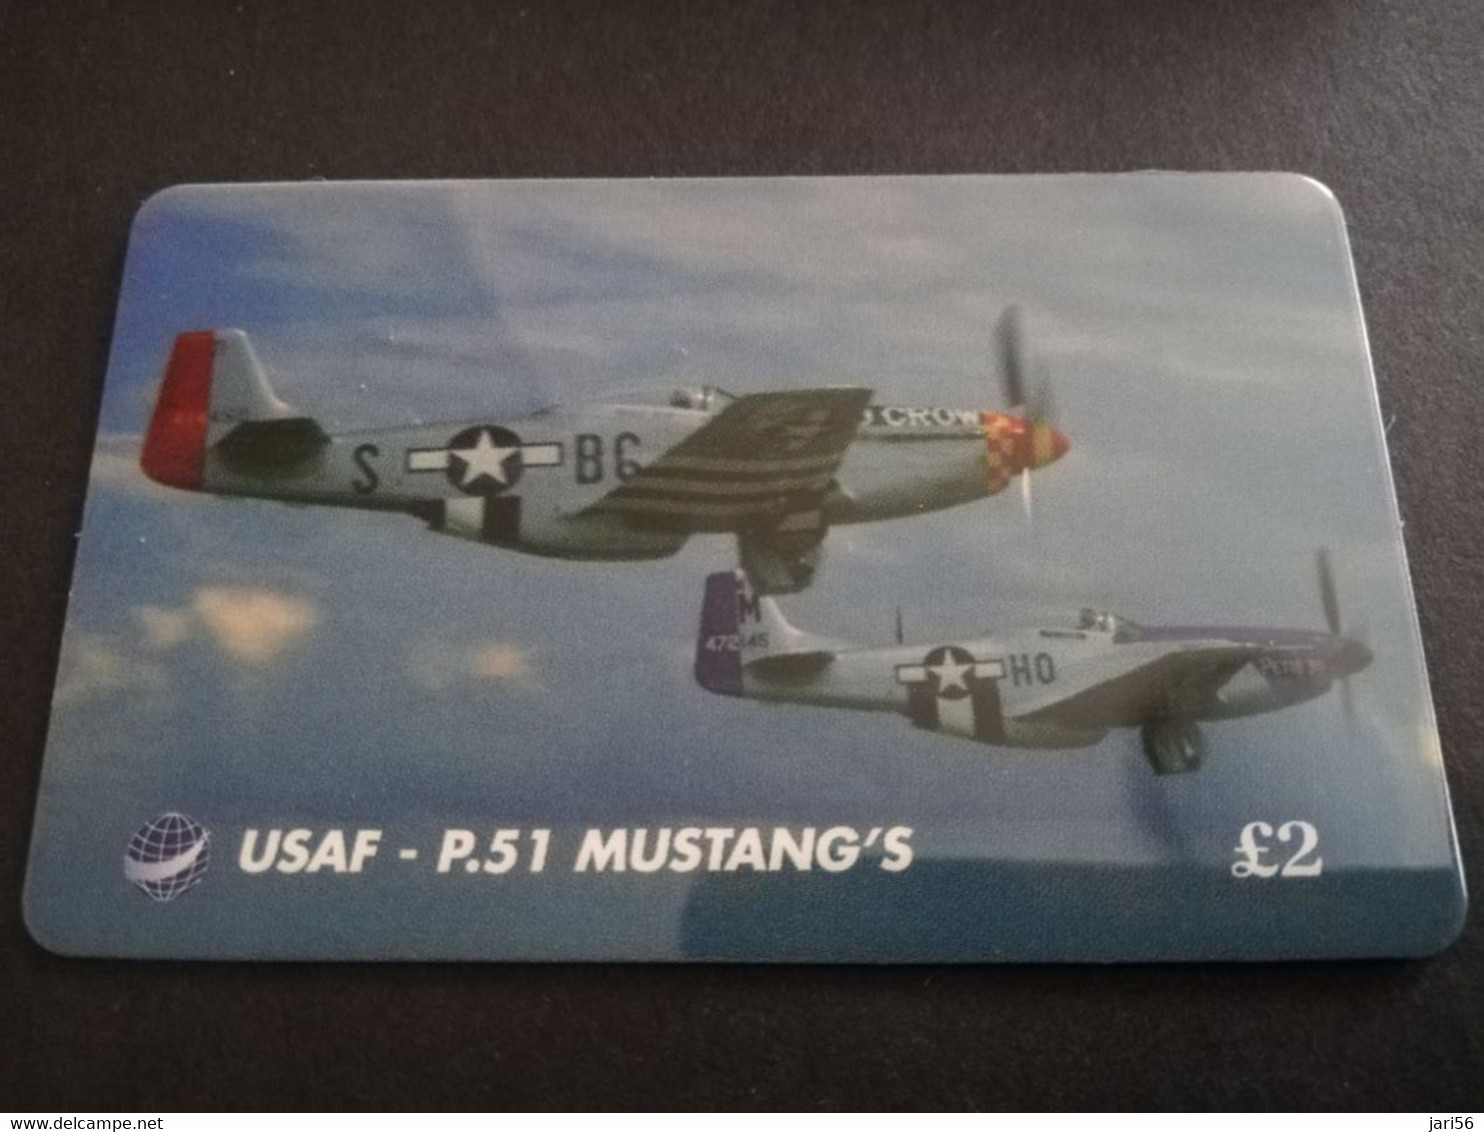 GREAT BRITAIN   2 POUND  AIR PLANES    USAF-P.51 MUSTANG'S   PREPAID CARD      **5447** - Collections